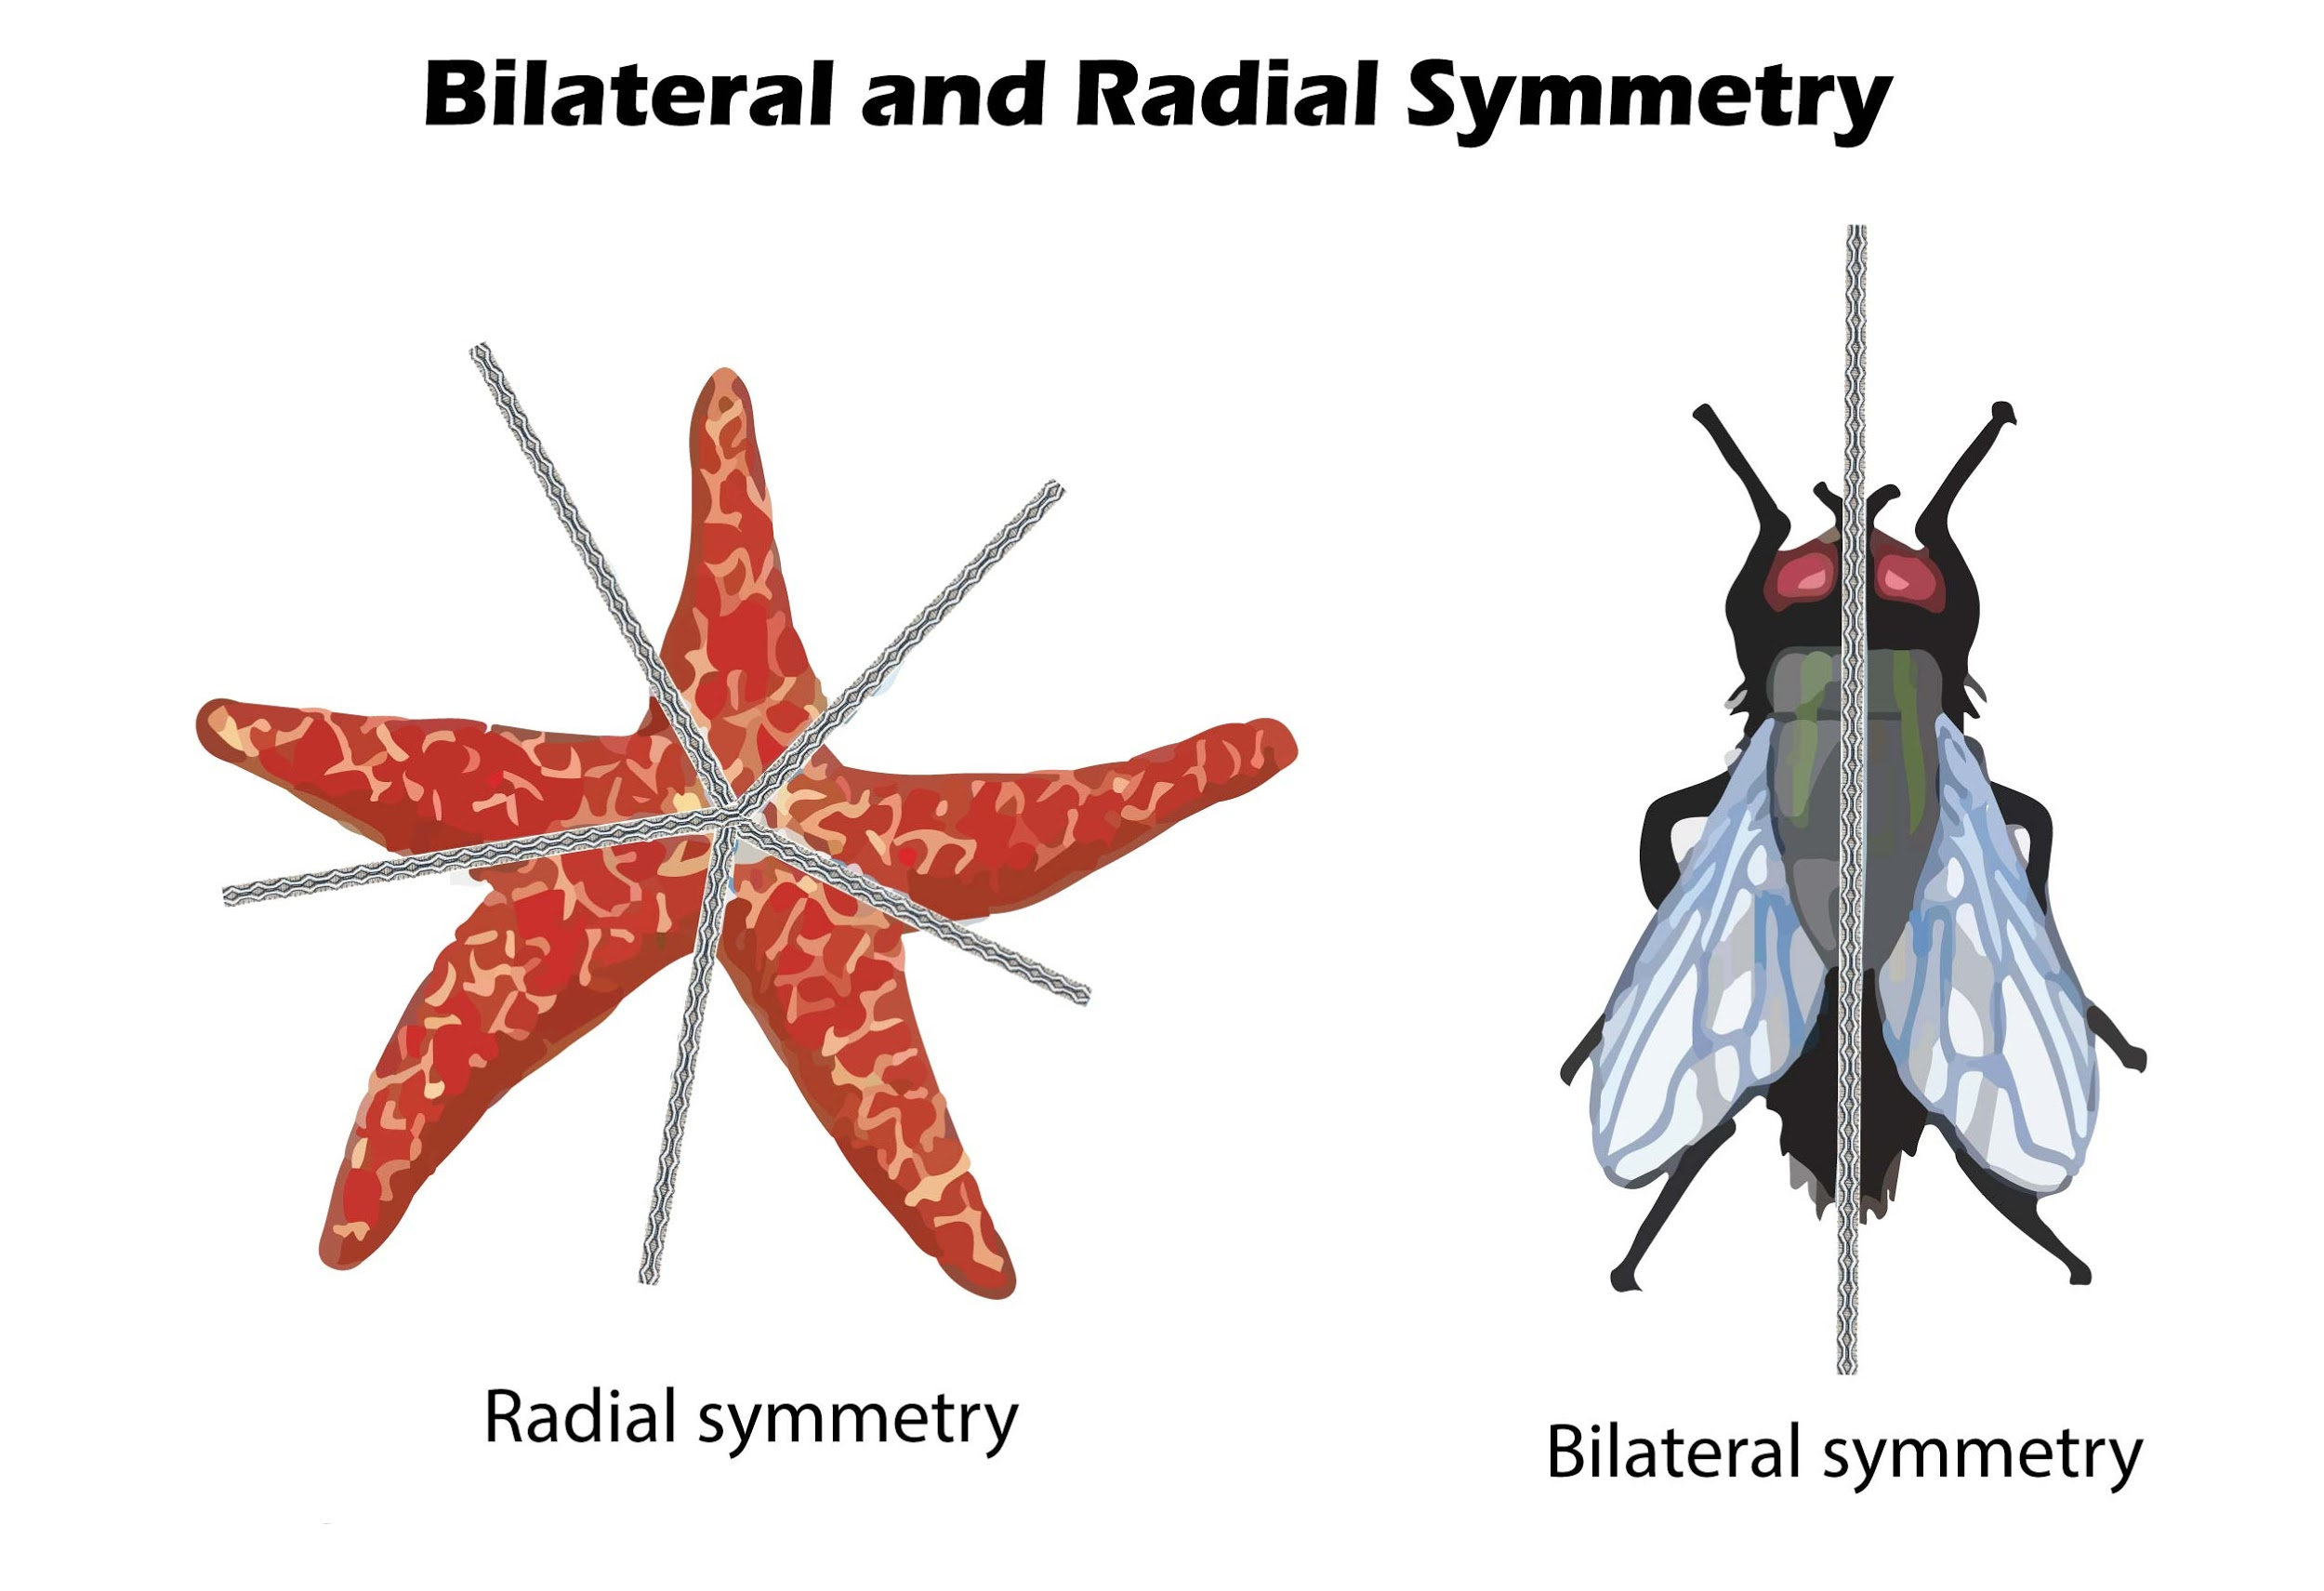 Radial symmetry occurs in aFishes bMolluscs CStarfishes ...